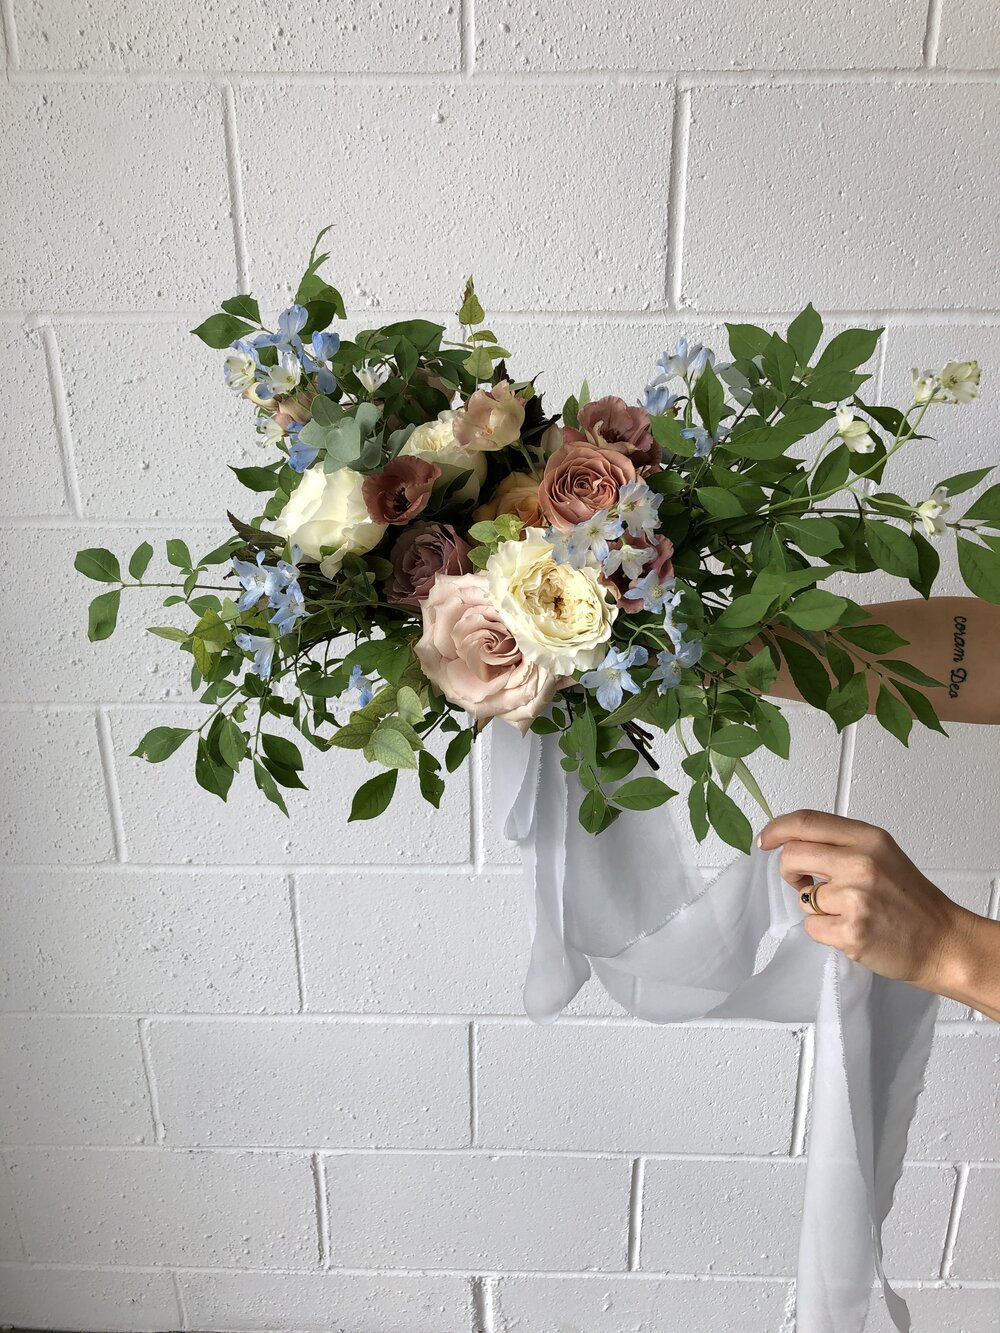 A Day In The Life: Your Florist — EVERGREEN FLOWER CO.